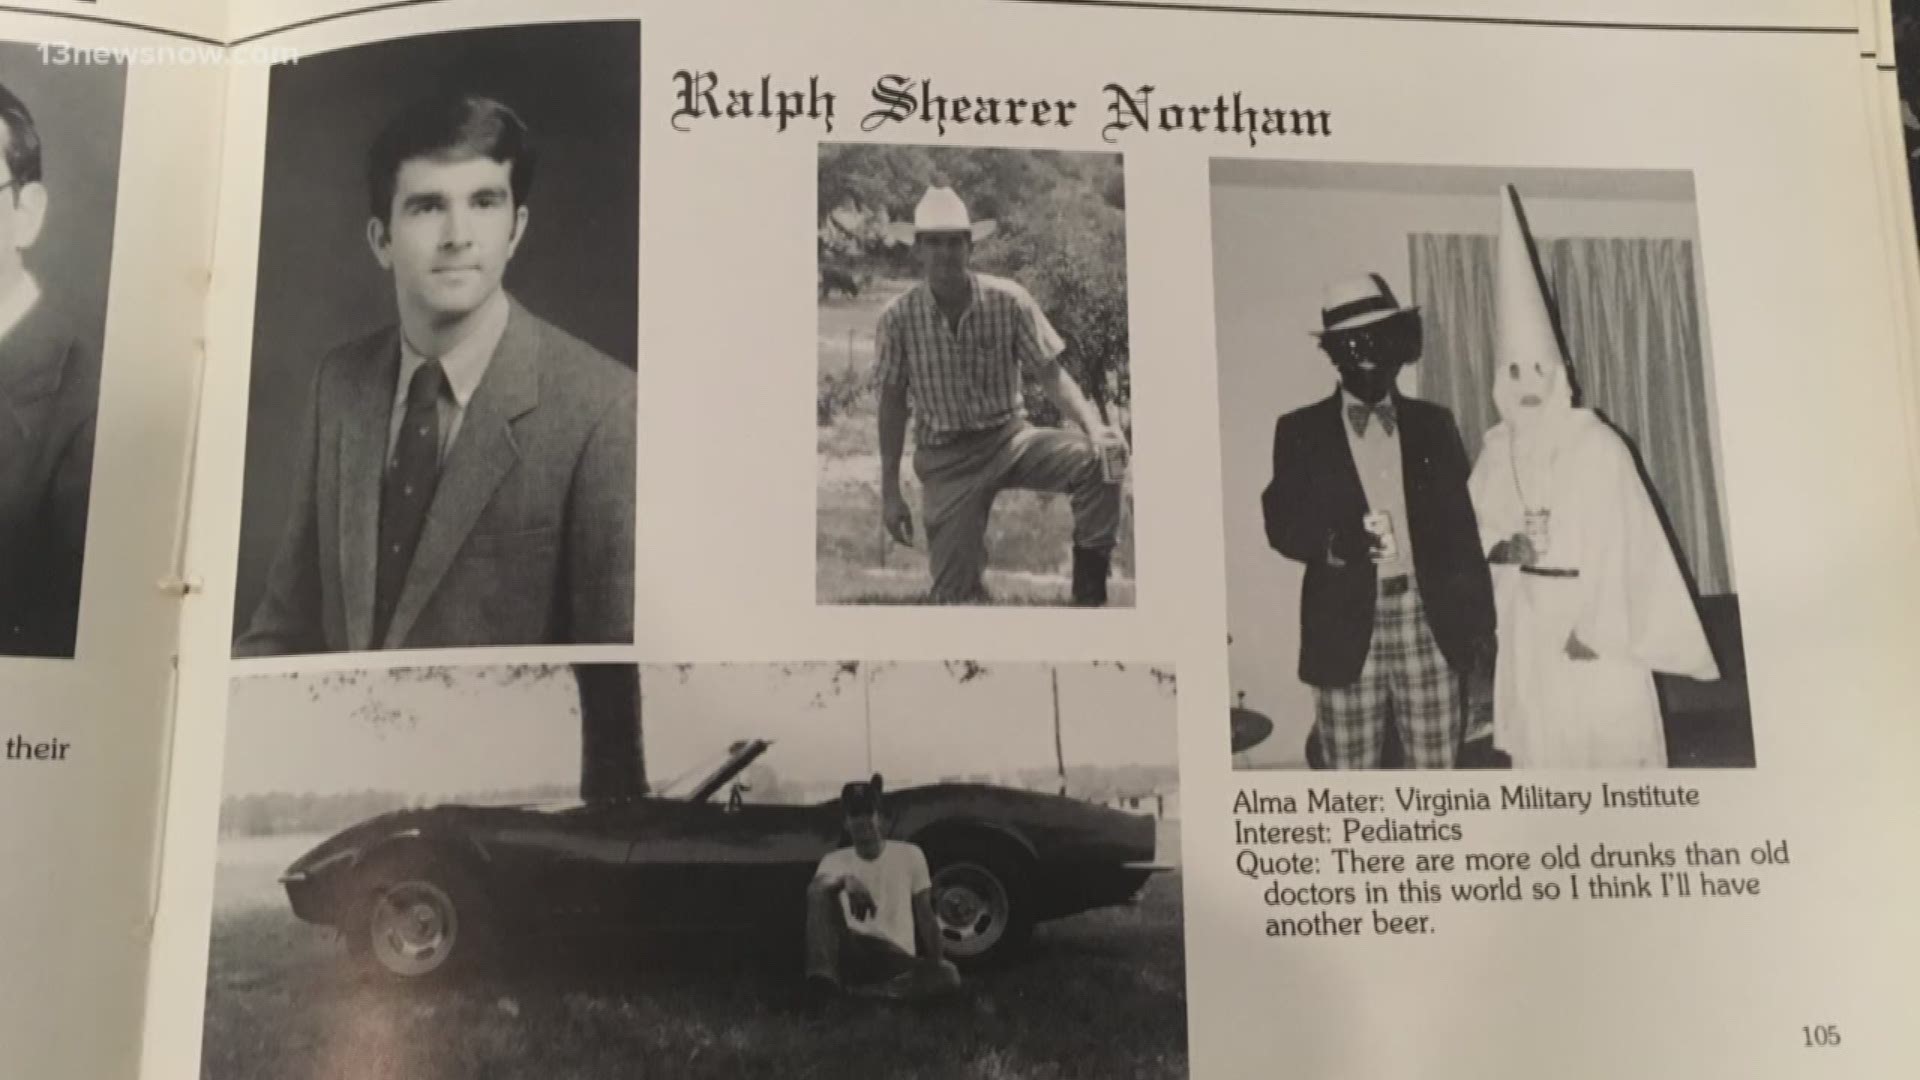 Governor Ralph Northam said he was pressured by his staff to issue an apology when the blackface photo was first released.